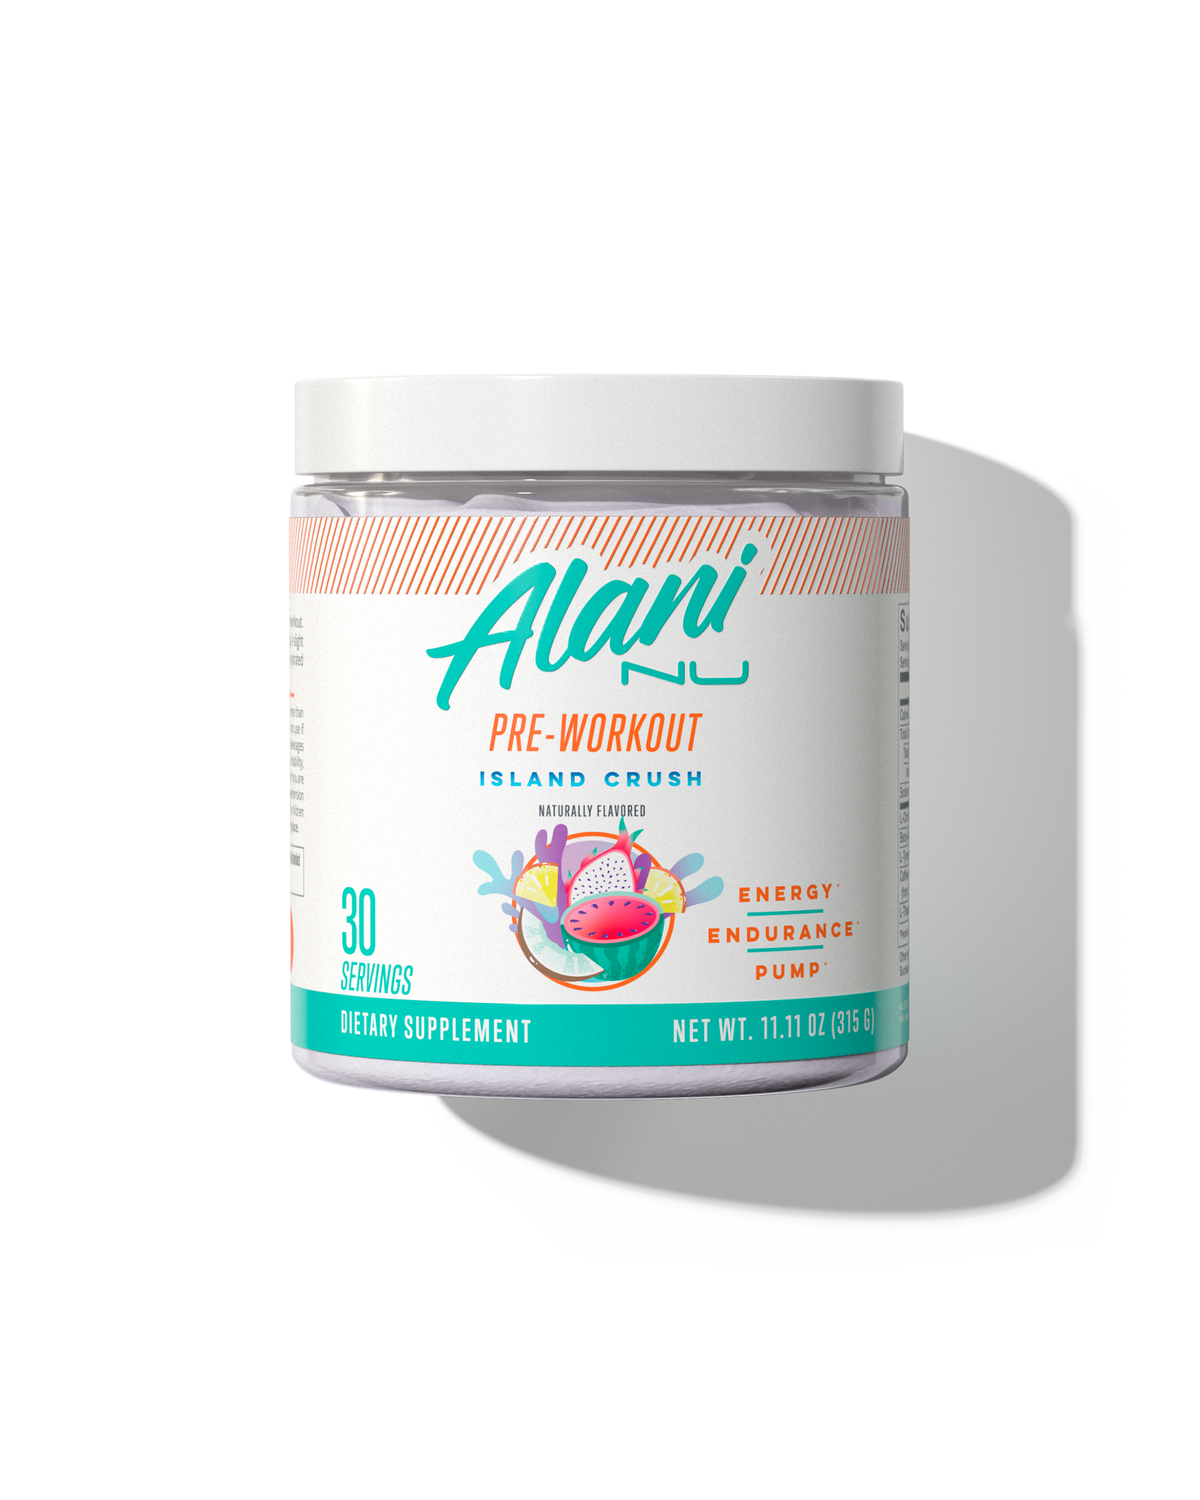 A 30 serving container Pre-workout in Island Crush flavor.